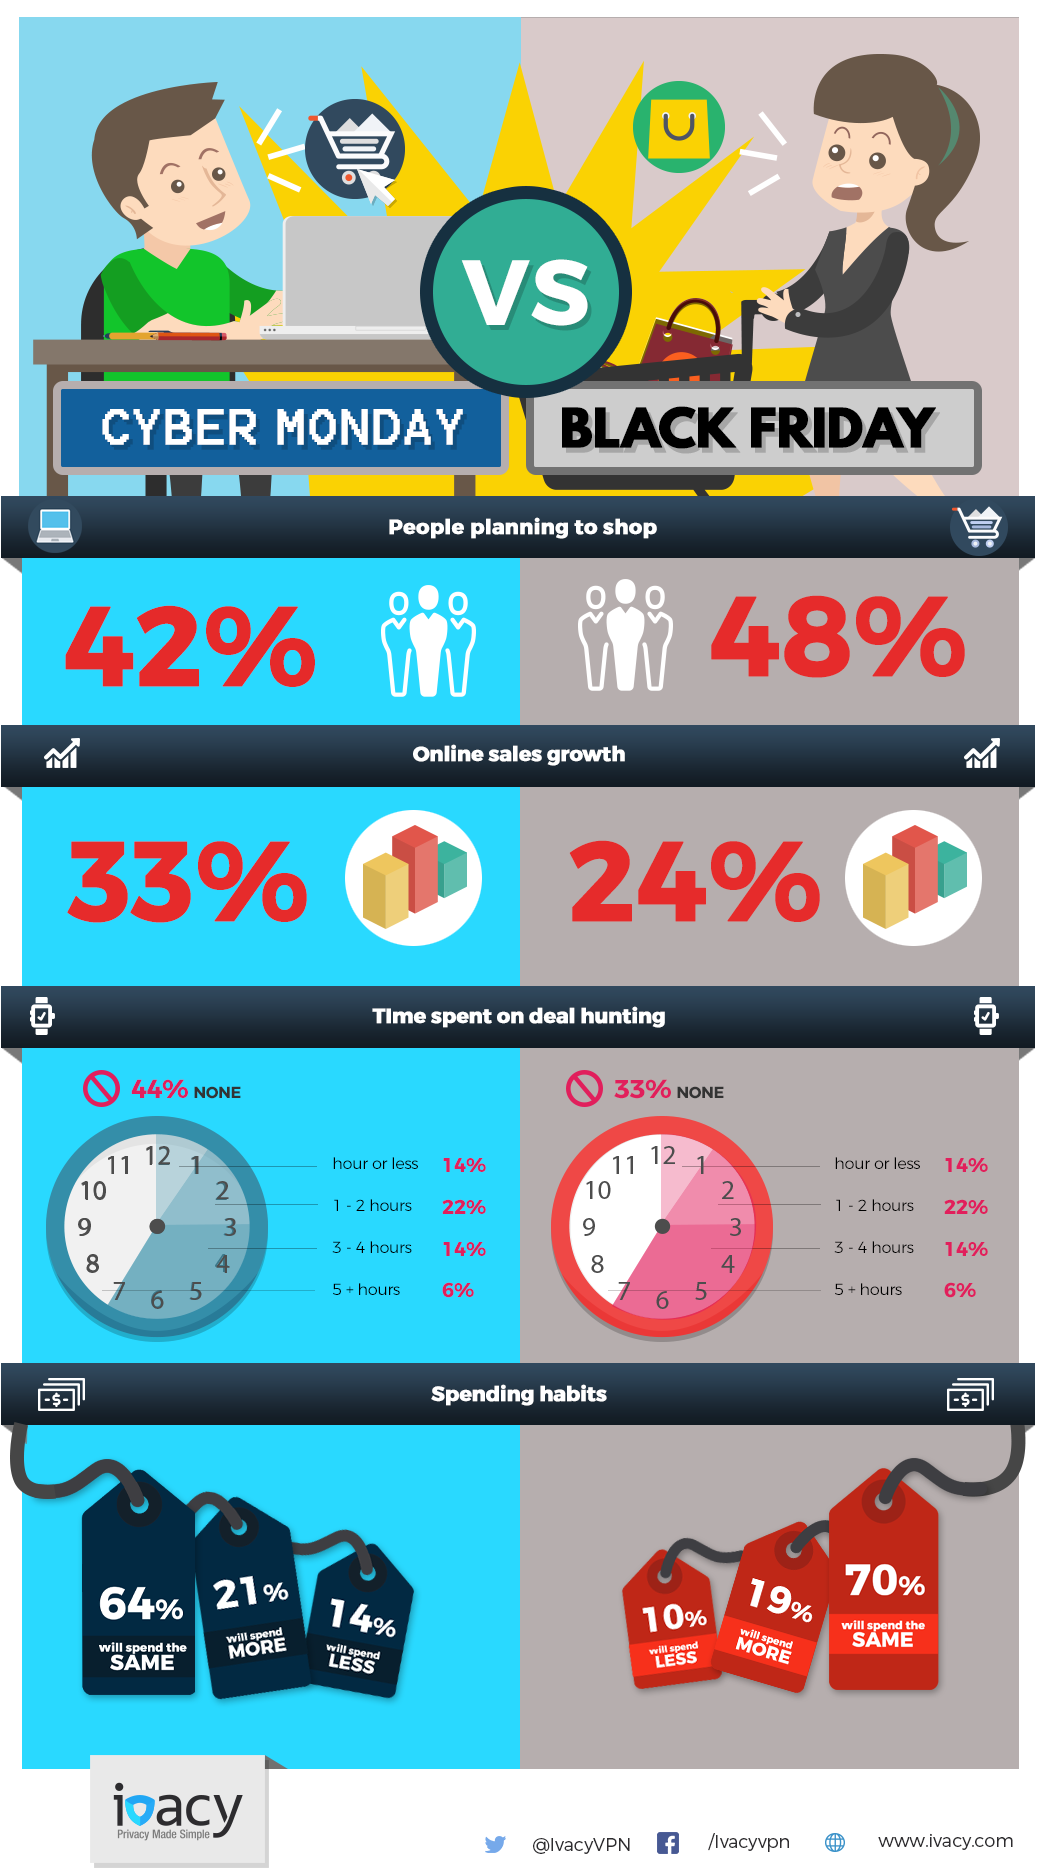 Black Friday vs. Cyber Monday Showdown The Battle for Online Buyers